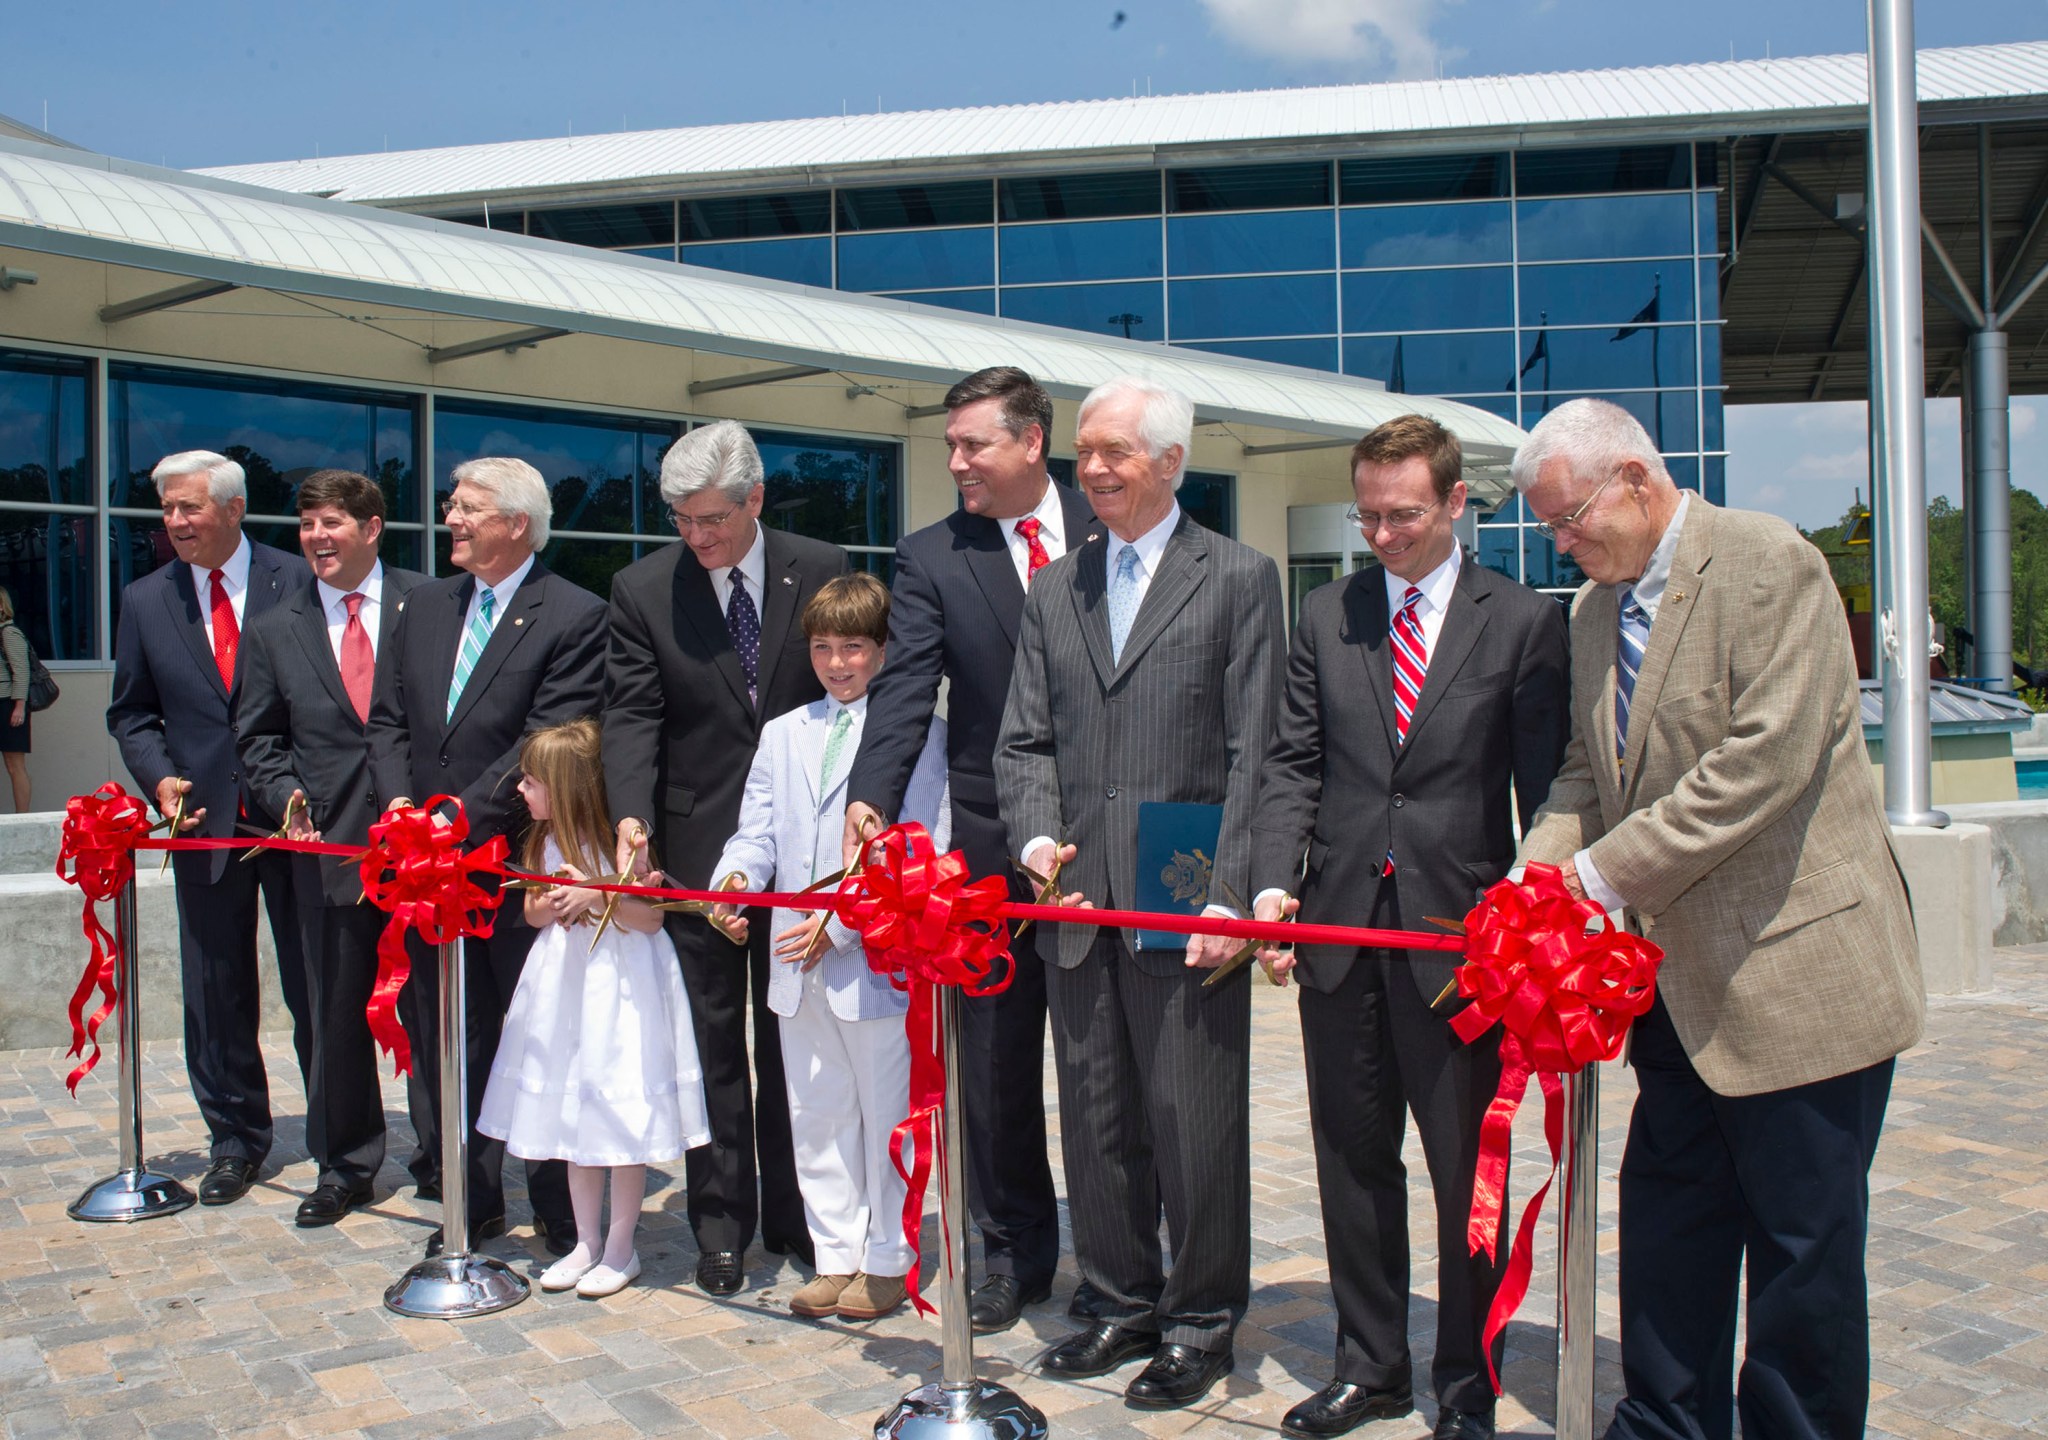 ribbon-cutting at INFINITY Science Center